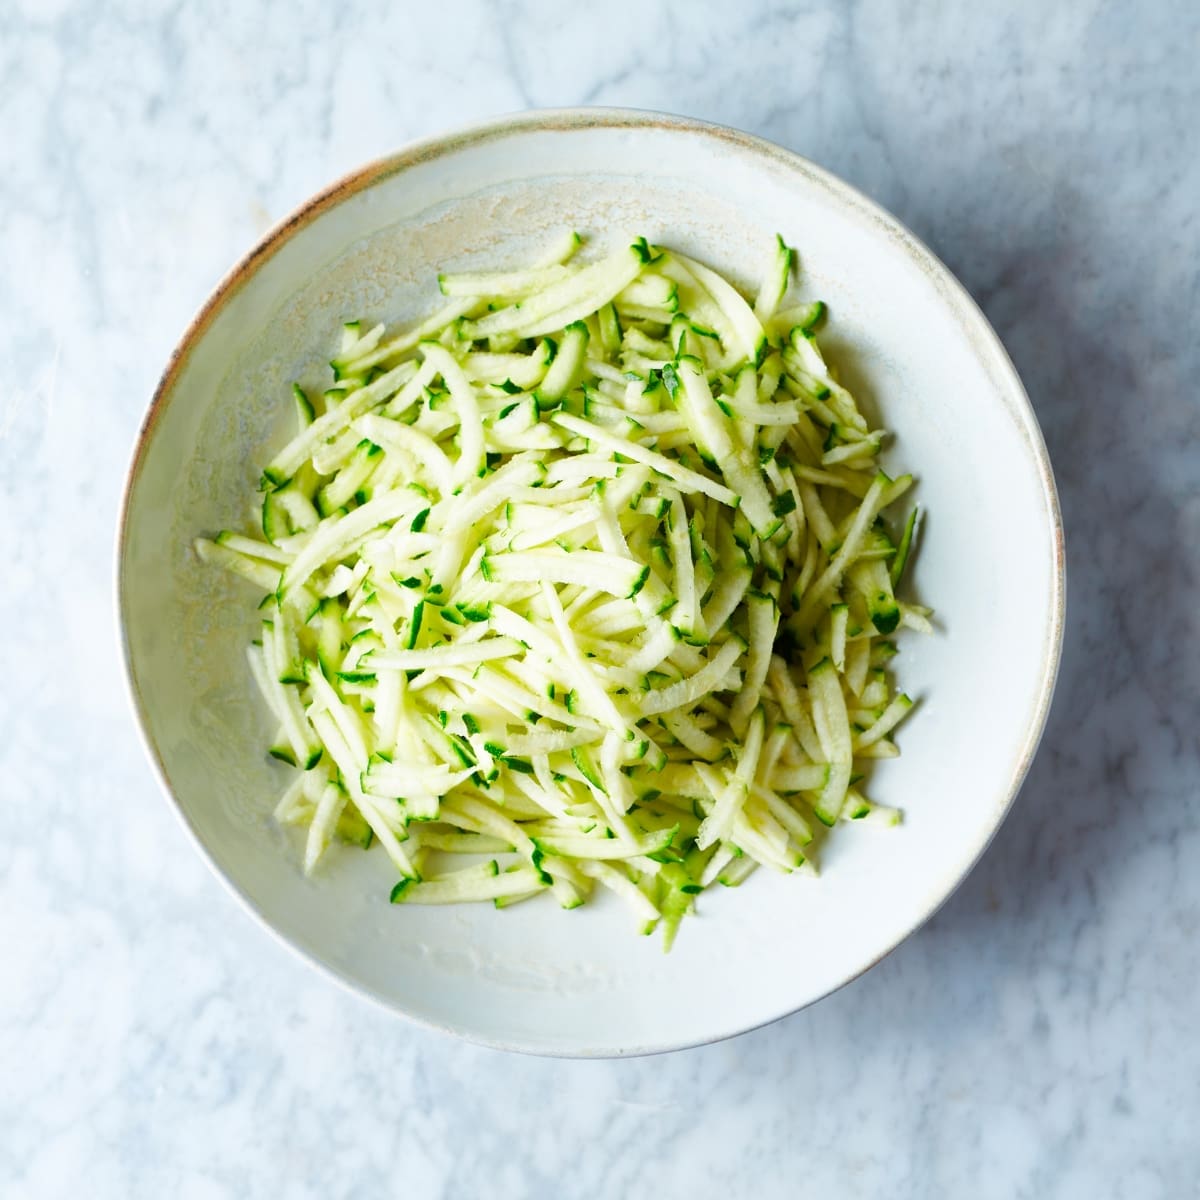 Grated Zucchini in a Bowl Top View